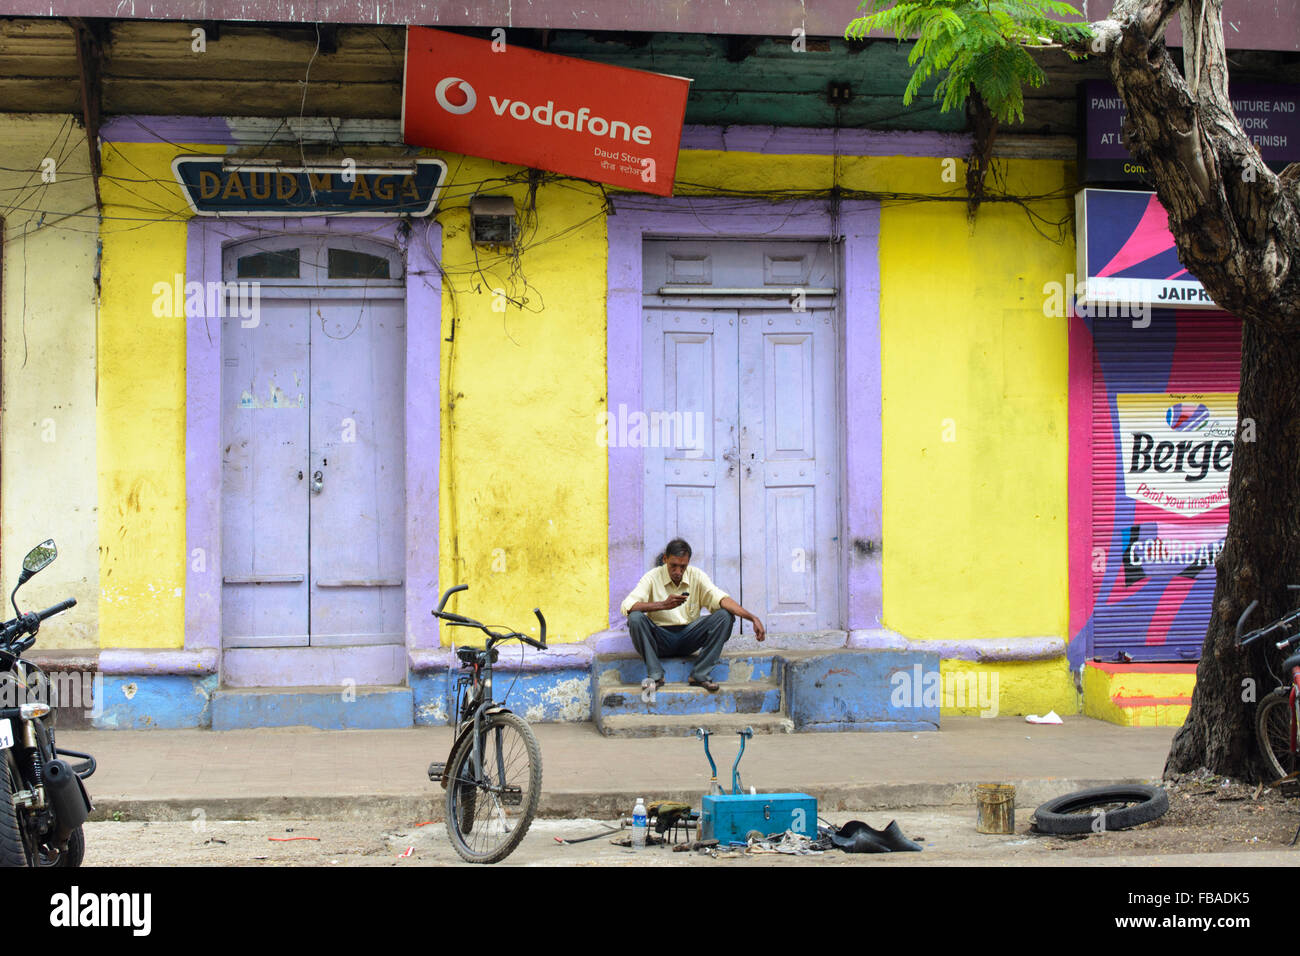 Indian man sitting on steps reading mobile phone messages underneath a vodafone sign in Panaji (Panjim), North Goa, India Stock Photo